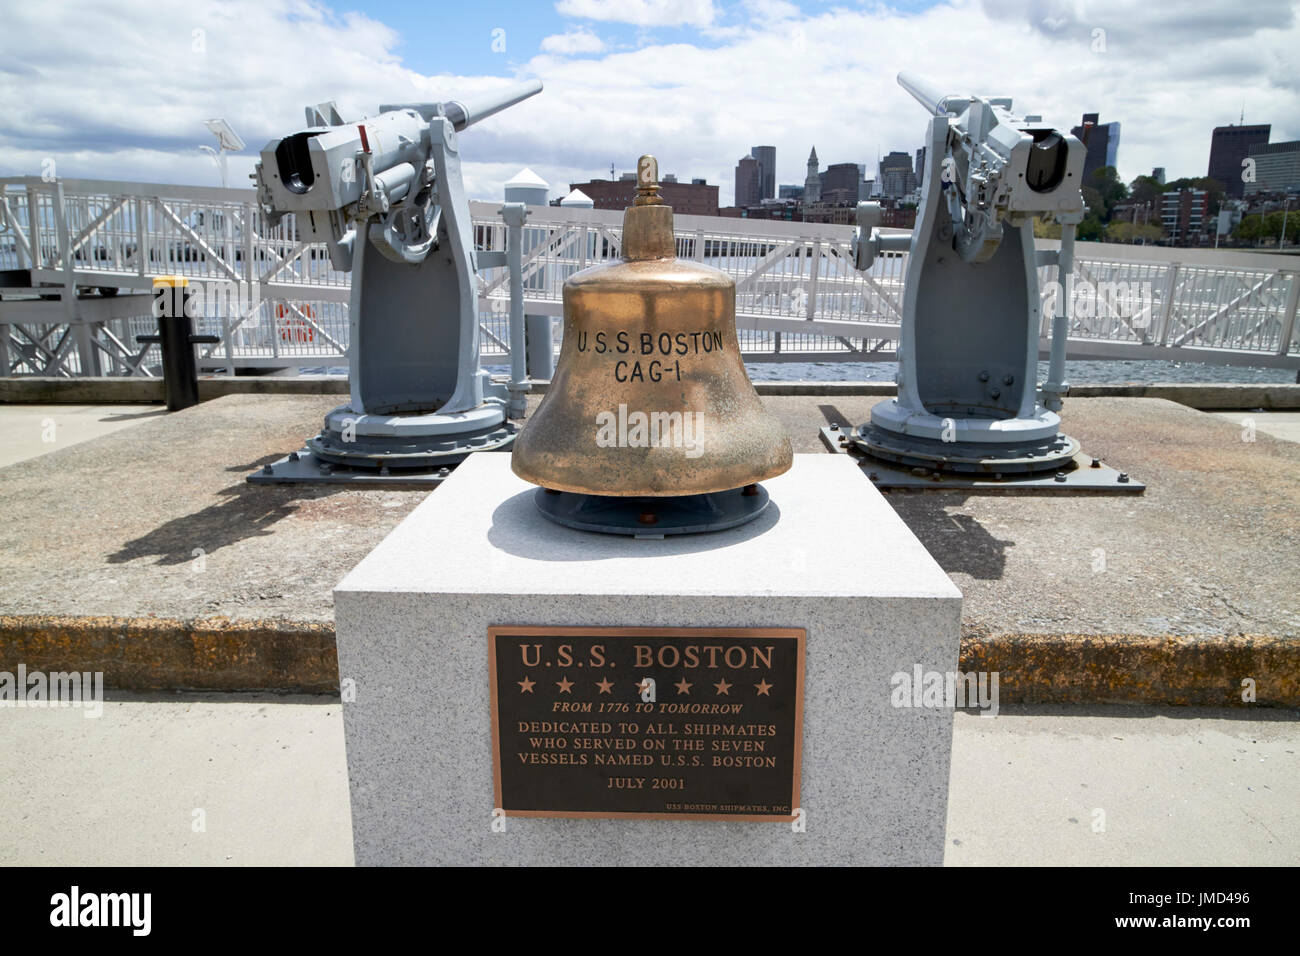 Uss boston cag-1 bell navires à Charlestown Navy Yard Boston USA Banque D'Images